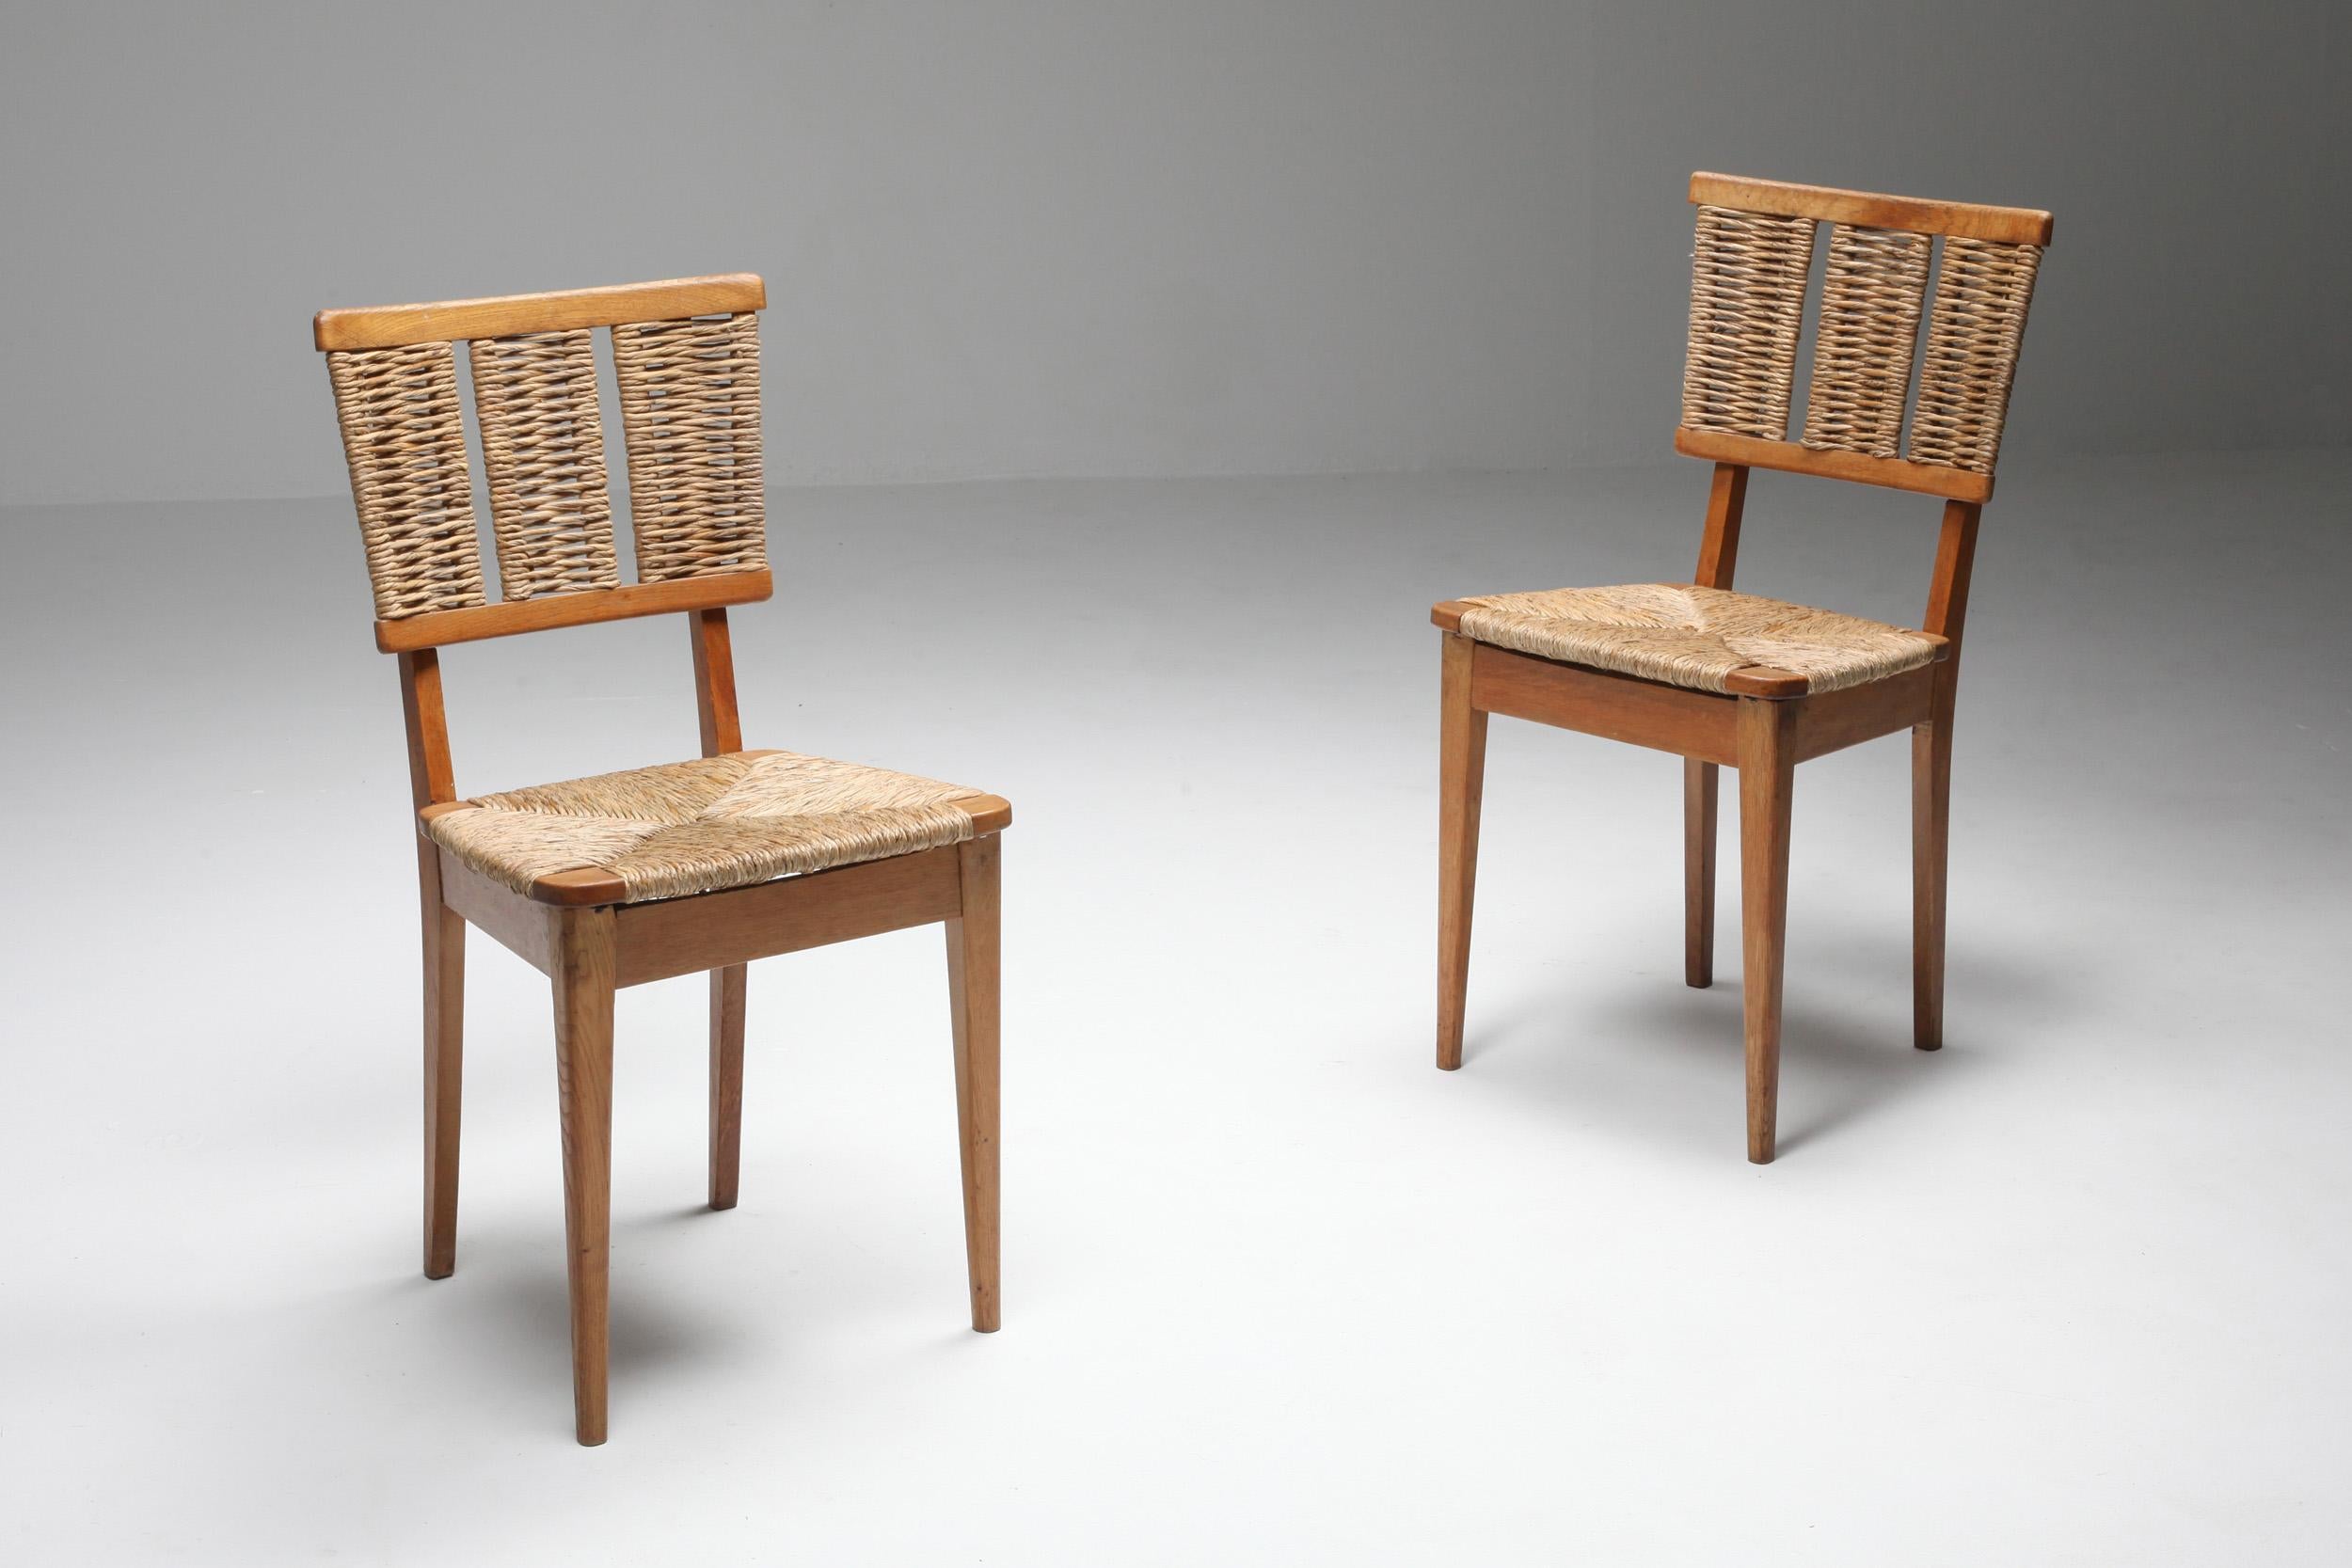 Dutch modernism, A2-1 dining chairs, Netherlands 1947

Rare and early modernist dining chairs in oak with cord seating and back.
Fits well in a rustic modern, wabi sabi inspired naturalist interior

Architect and designer Mart Stam (1899-1989)